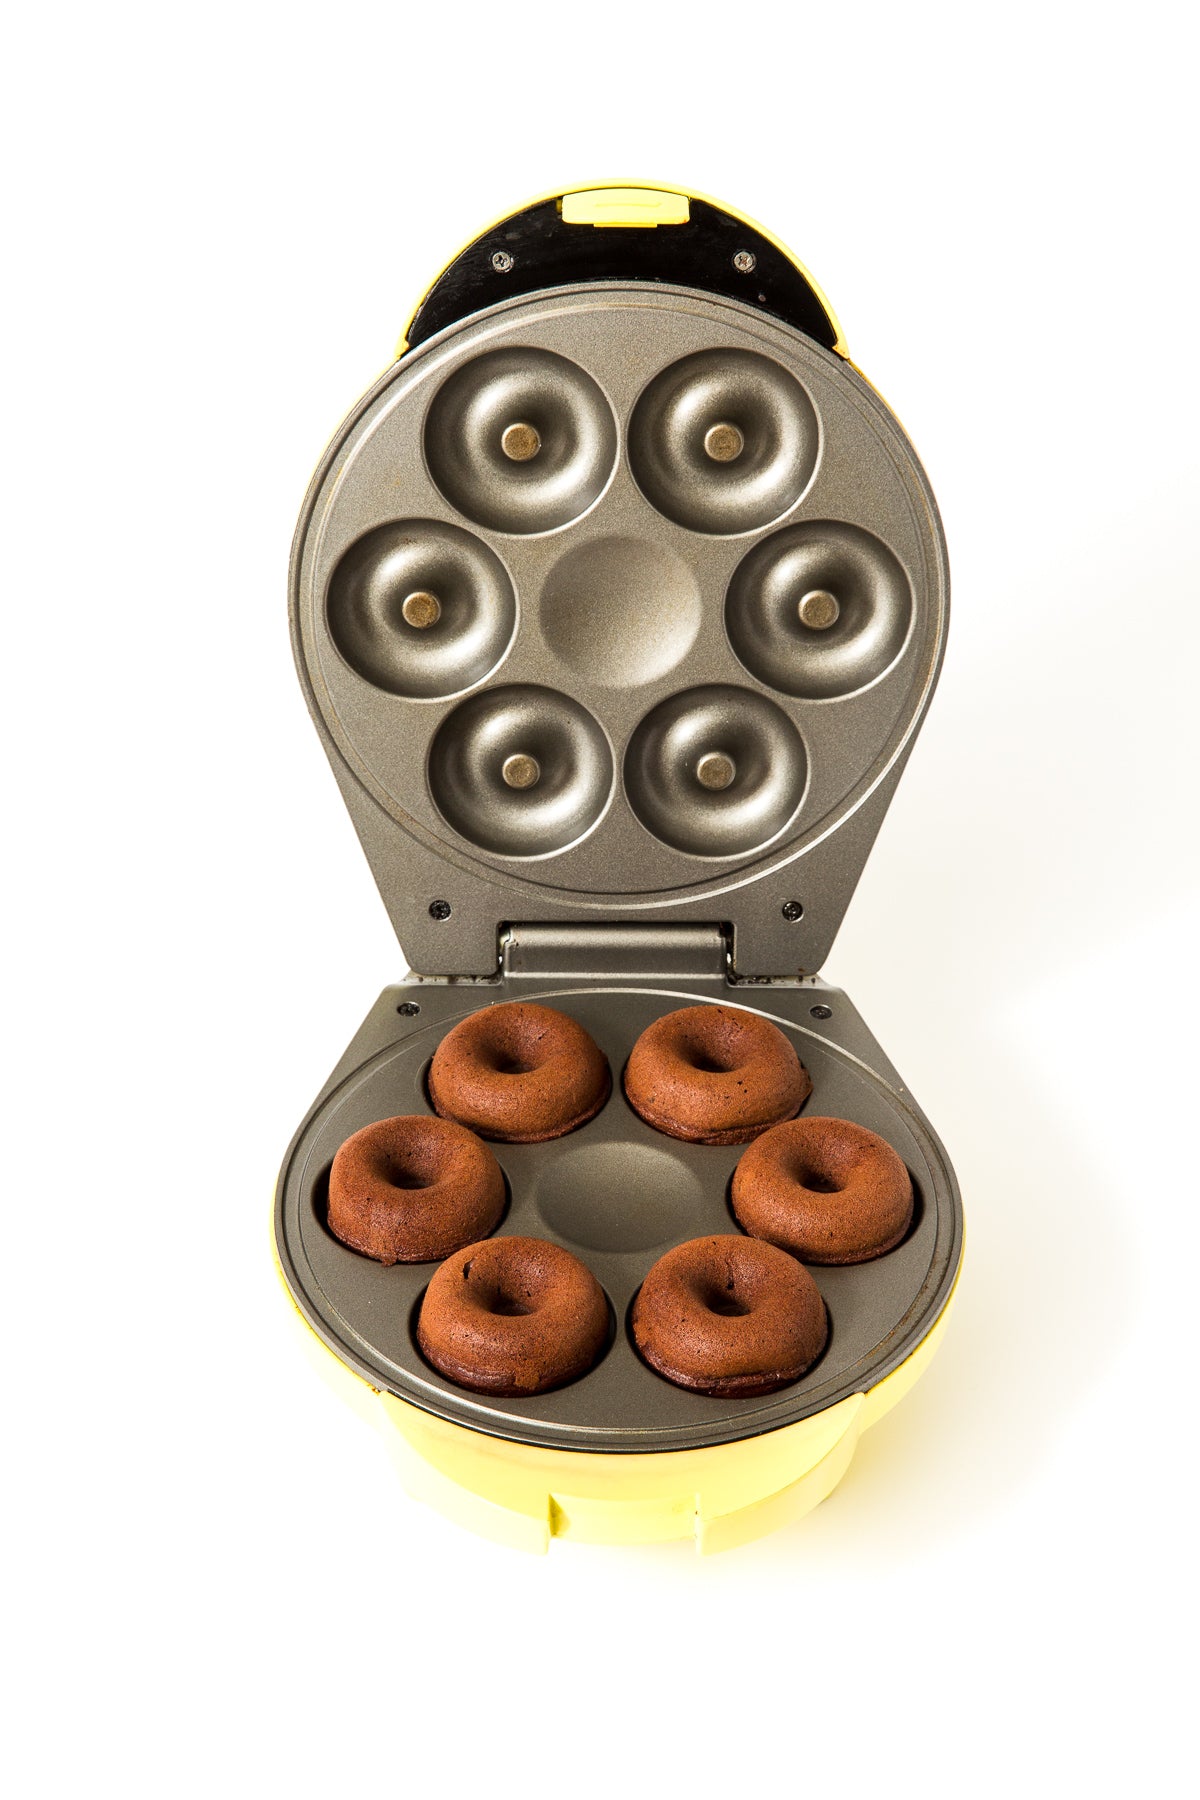 Image of six Miss Jones Baking Co Guinness Glazed Chocolate Donuts in a donut maker mold